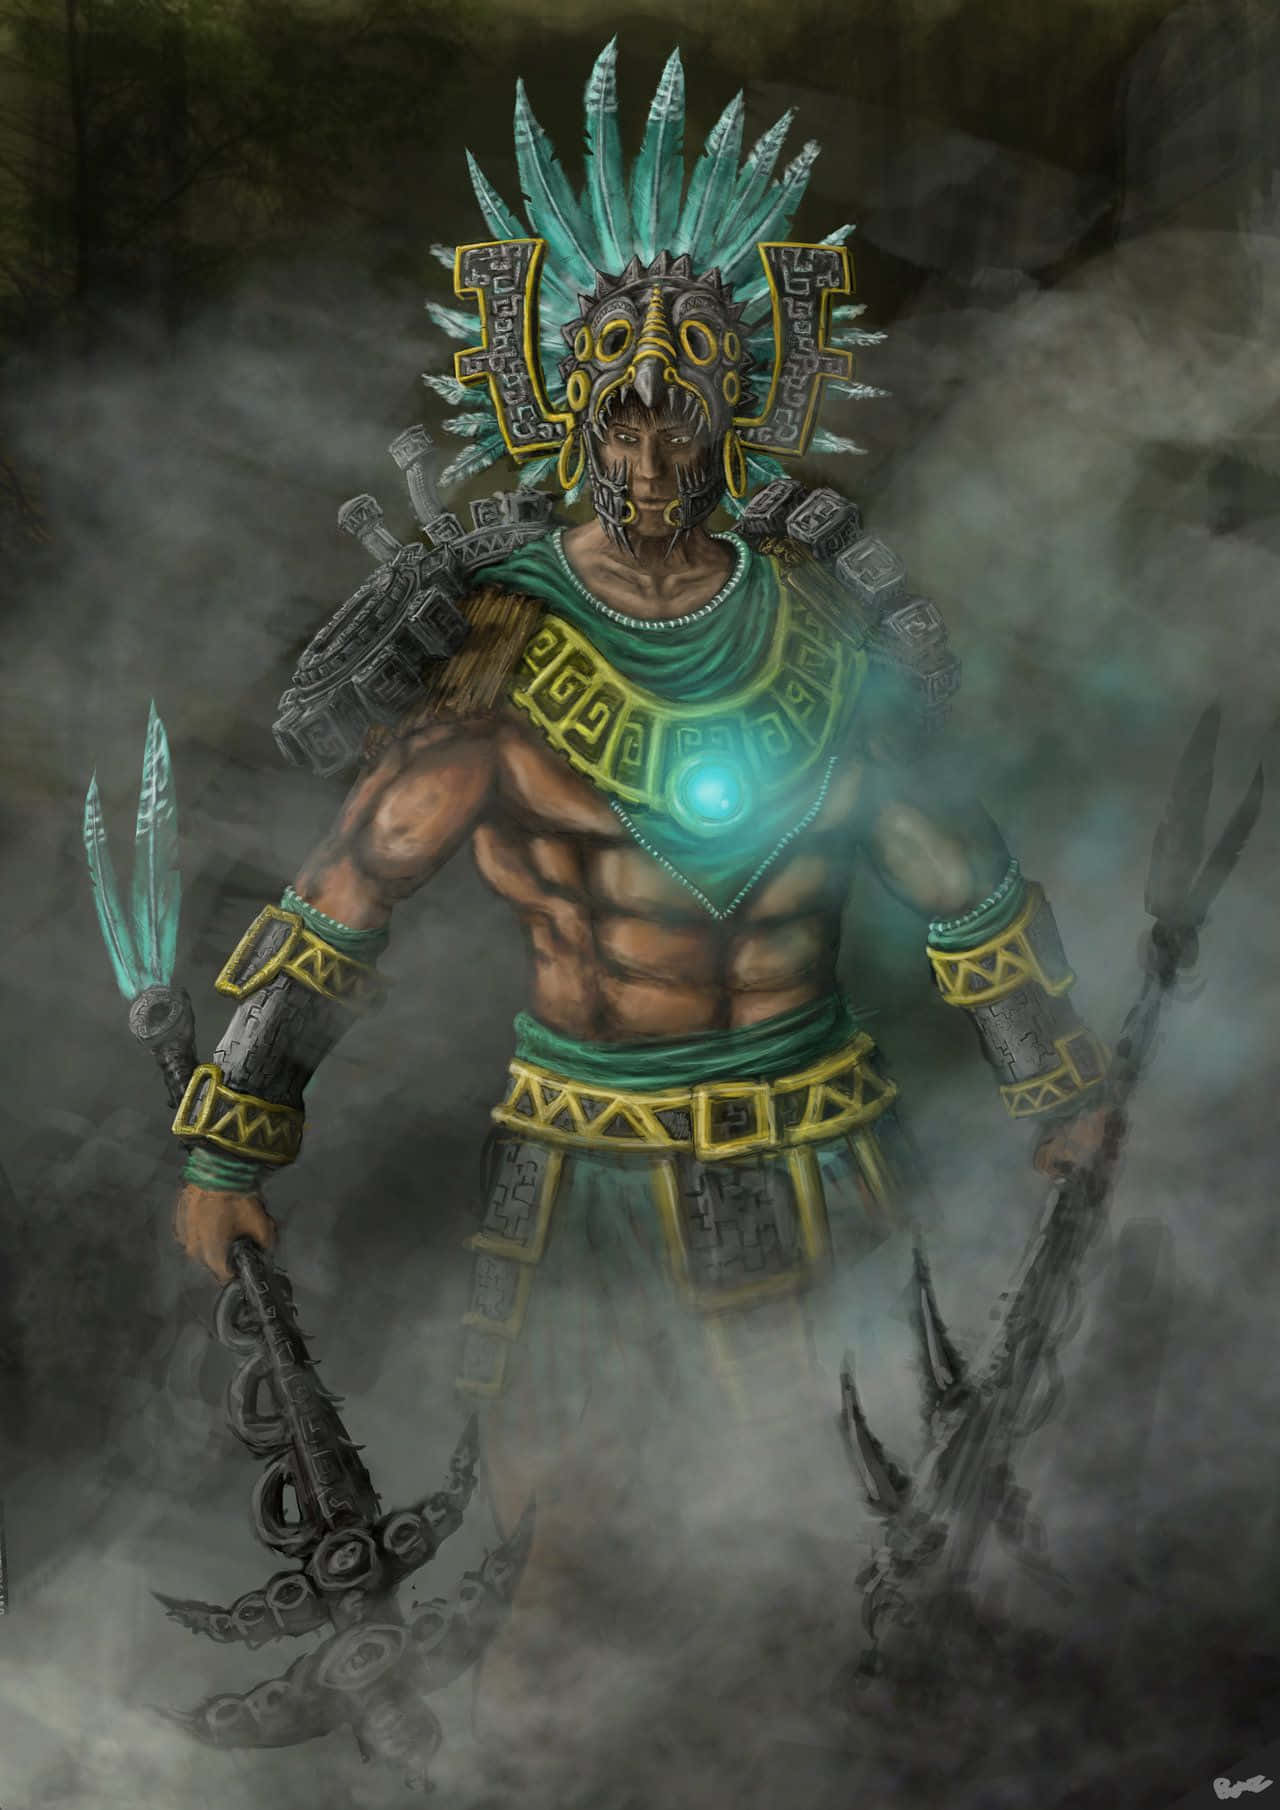 An Aztec Warrior Taunting His Enemy Wallpaper